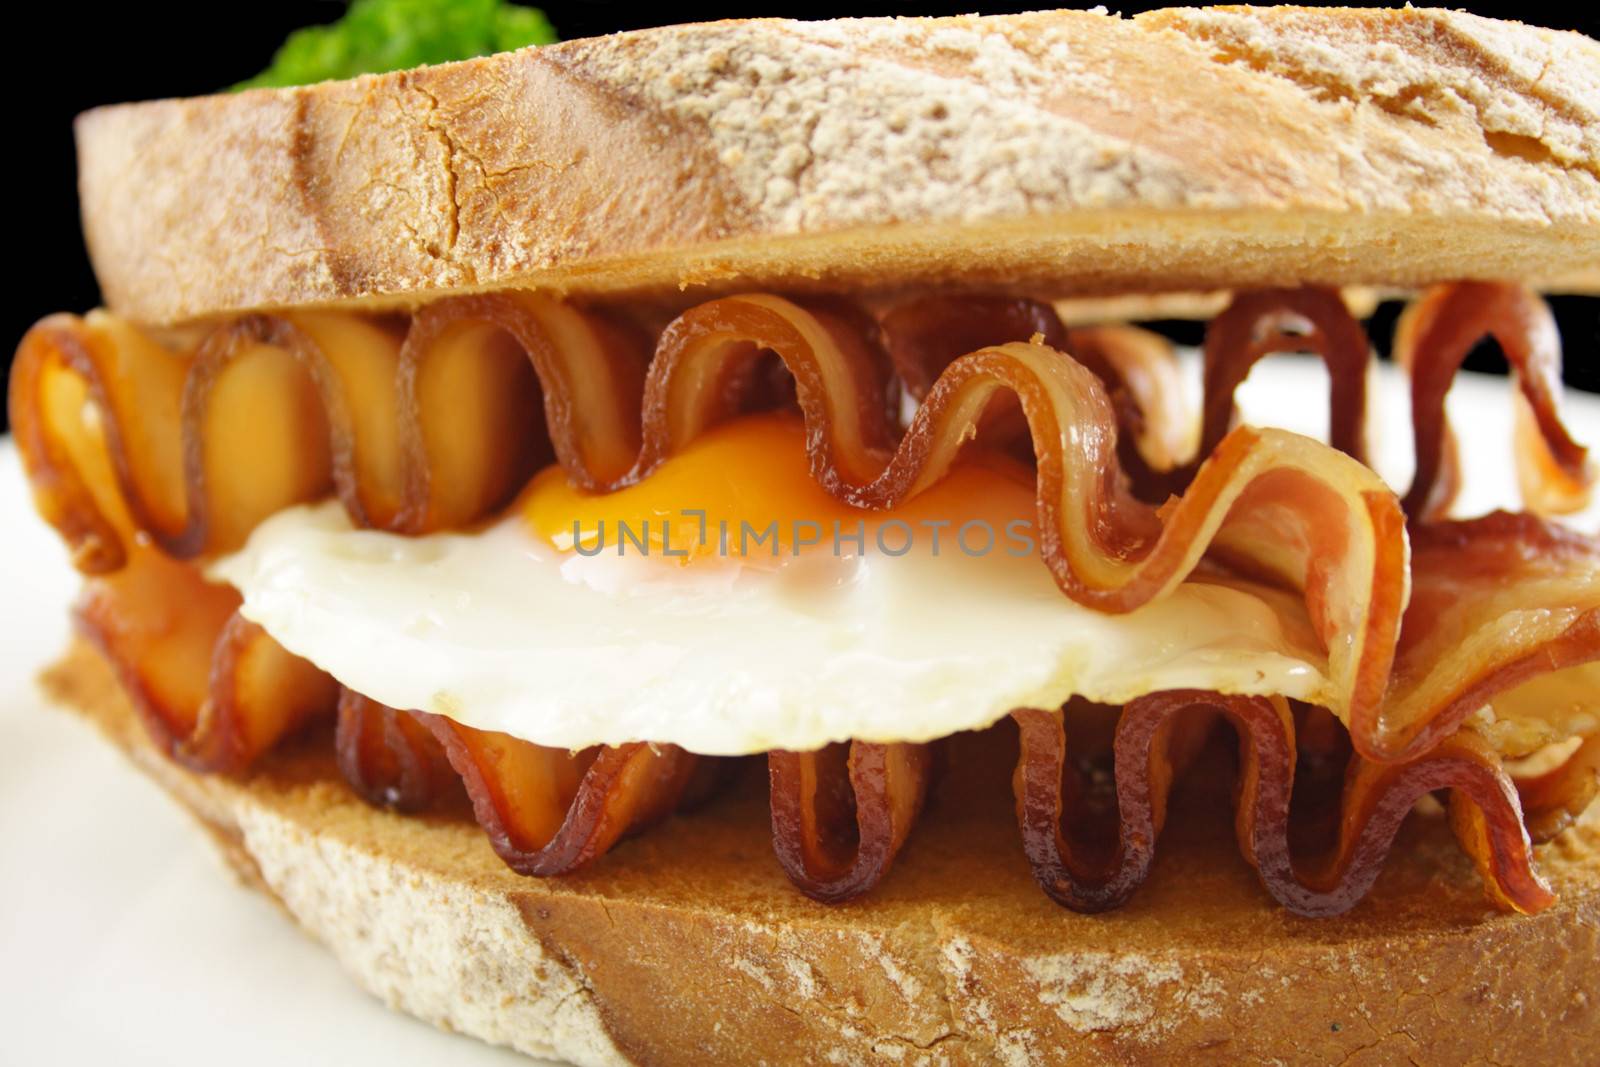 Curled bacon and egg sandwich ready to serve.